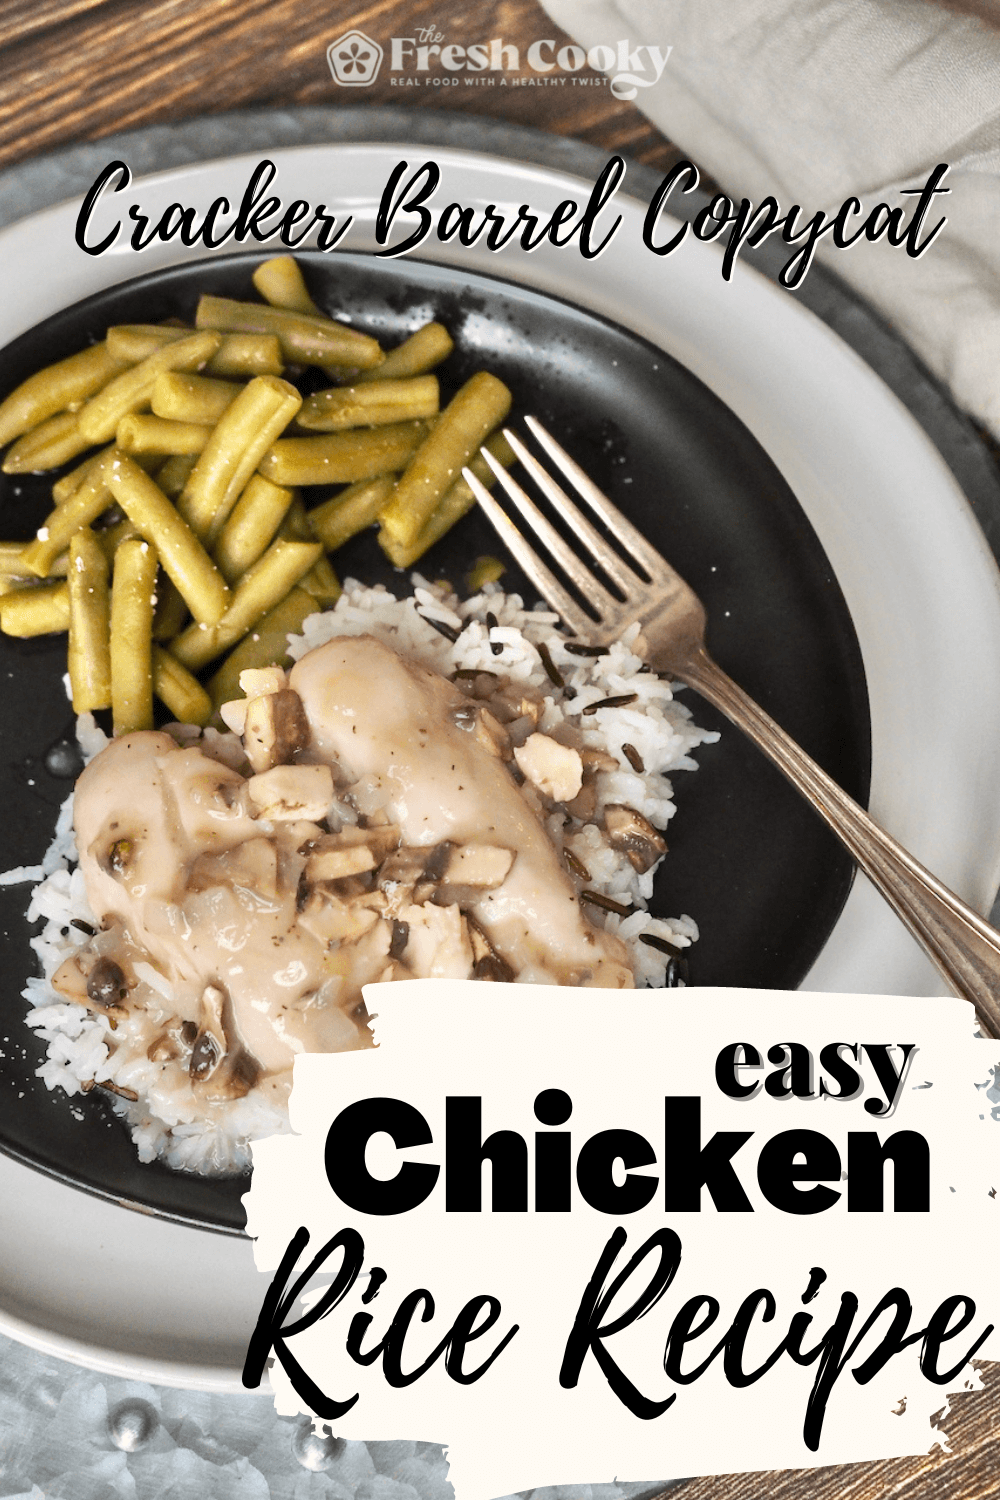 Pin for Cracker Barrel Chicken and Rice Recipe with image of creamy chicken tenderloins and chicken gravy on a bed of rice with green beans, on a pretty black plate with antique silver spoon.